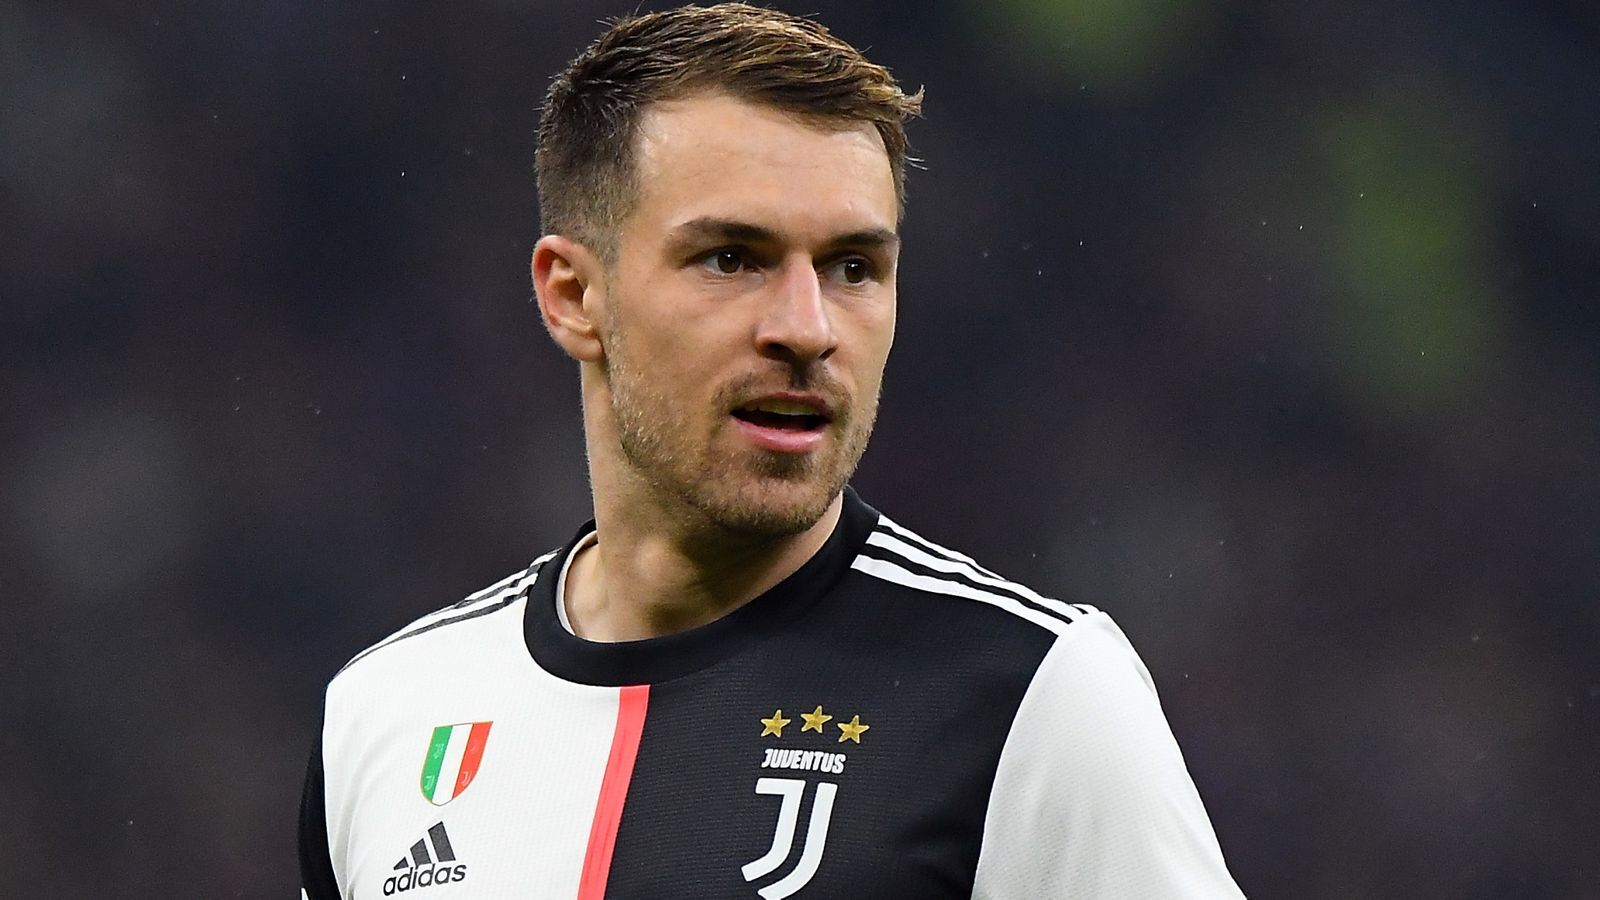 Juventus Will Sell Aaron Ramsey to Balance Their Finances